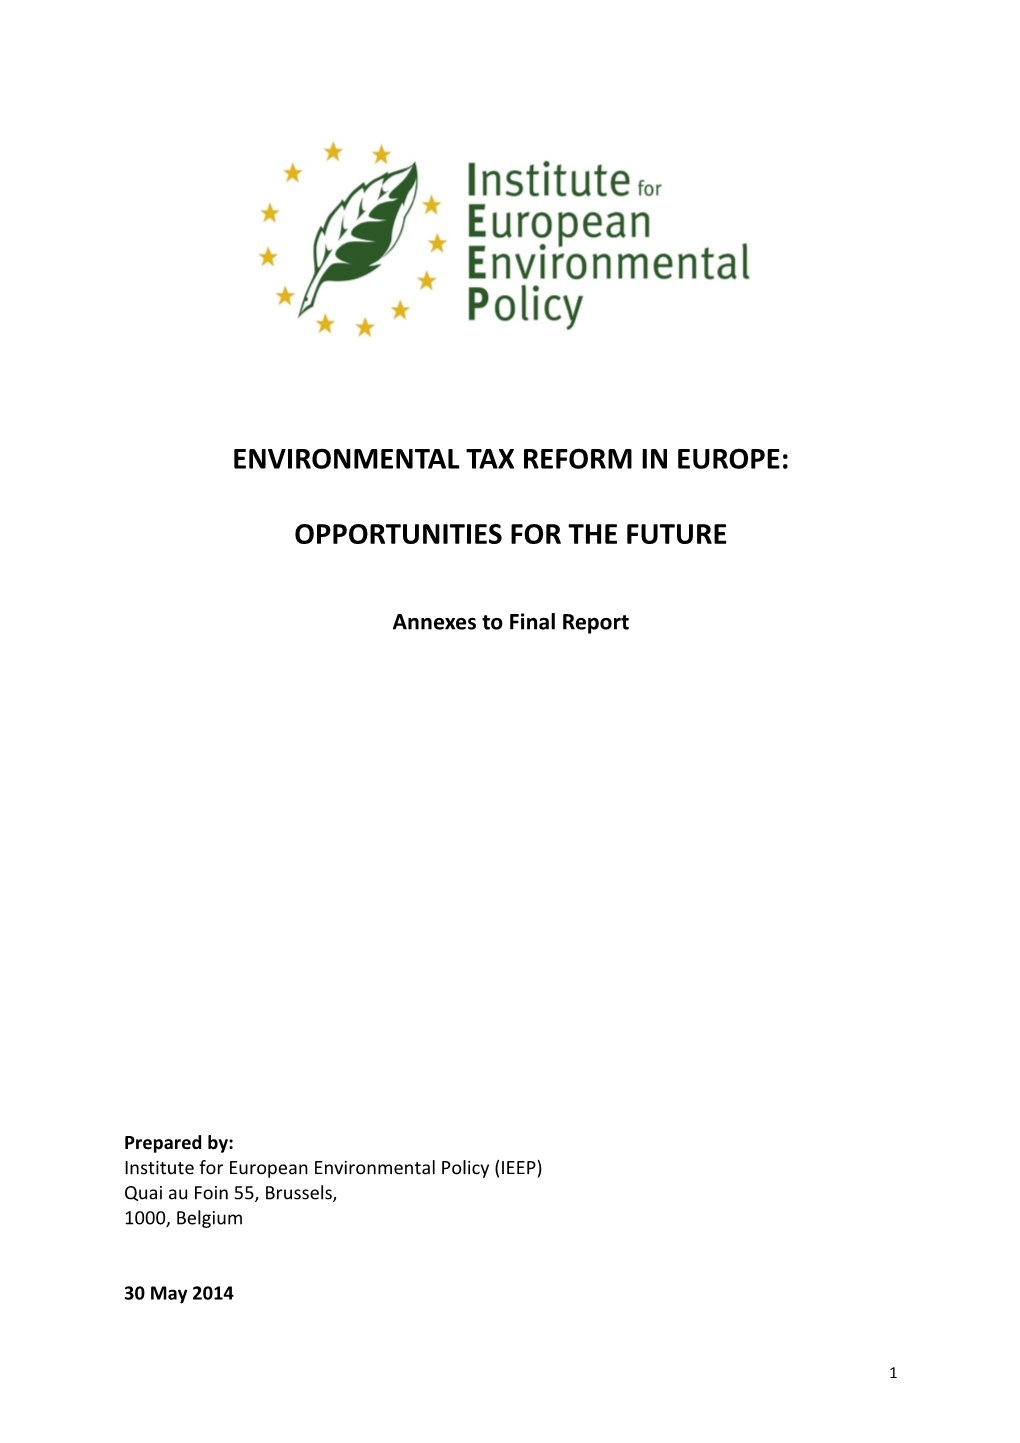 Environmental Tax Reform in Europe: Opportunities for the Future